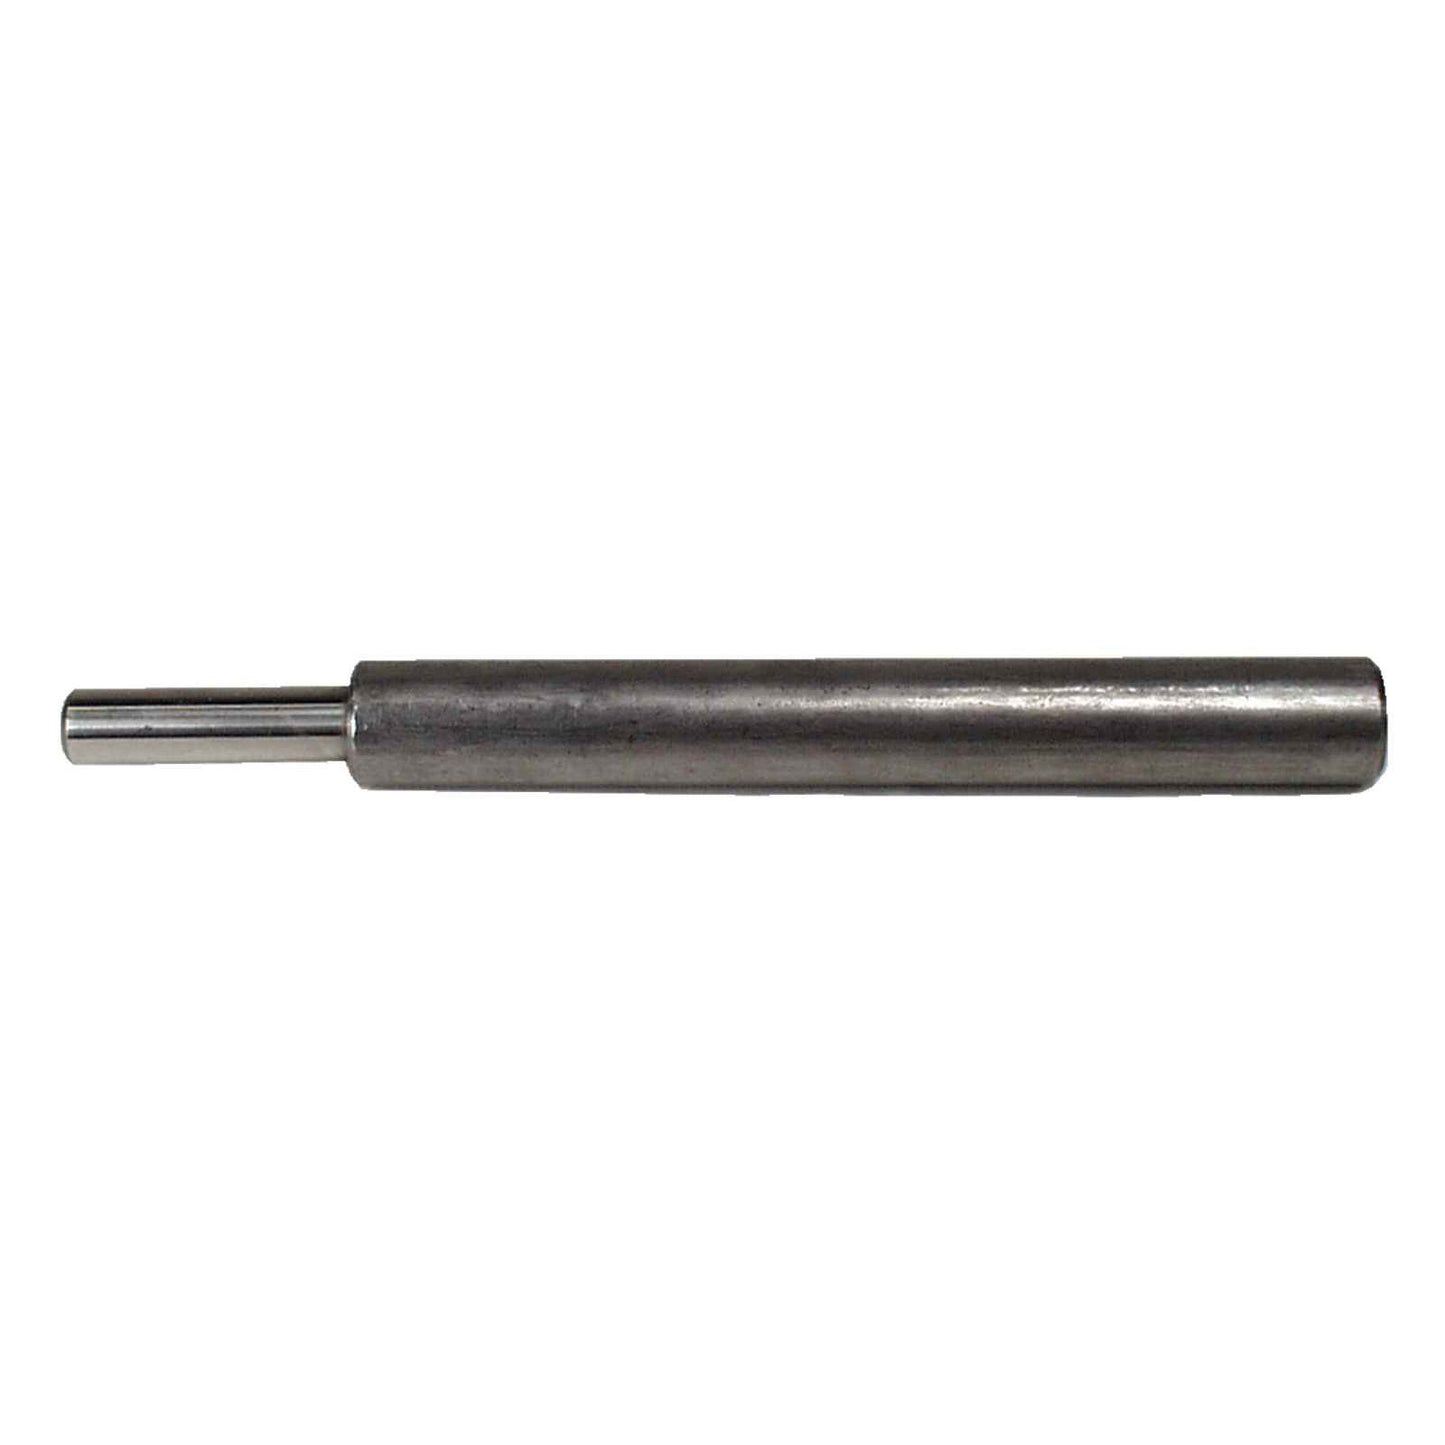 3/8" Strong-Tie Drop-In Anchor Setting Tool, Pkg 1